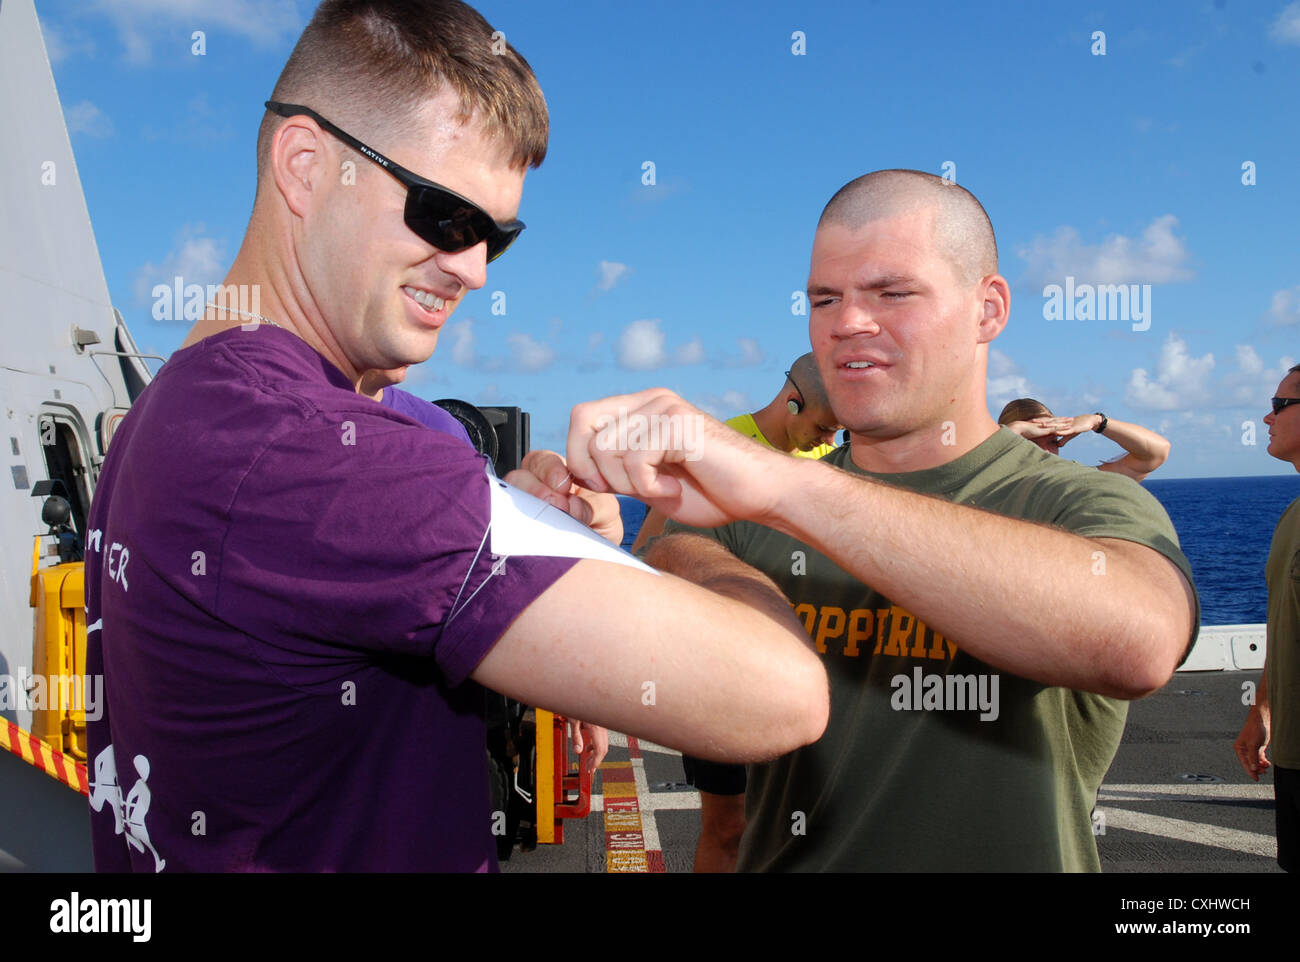 Capt. Brian Kennedy helps Capt. Zachary Jones attach his race number during the Landaker 5k held by the “Purple Foxes” of Marine Medium Helicopter Squadron (HMM) 364 (REIN) aboard amphibious transport dock ship USS Green Bay (LPD 20). Green Bay is part of the Peleliu Amphibious Ready Group currently underway on a Western Pacific deployment with amphibious assault ship USS Peleliu (LHA 5) and amphibious dock landing ship USS Rushmore (LSD 47) Stock Photo